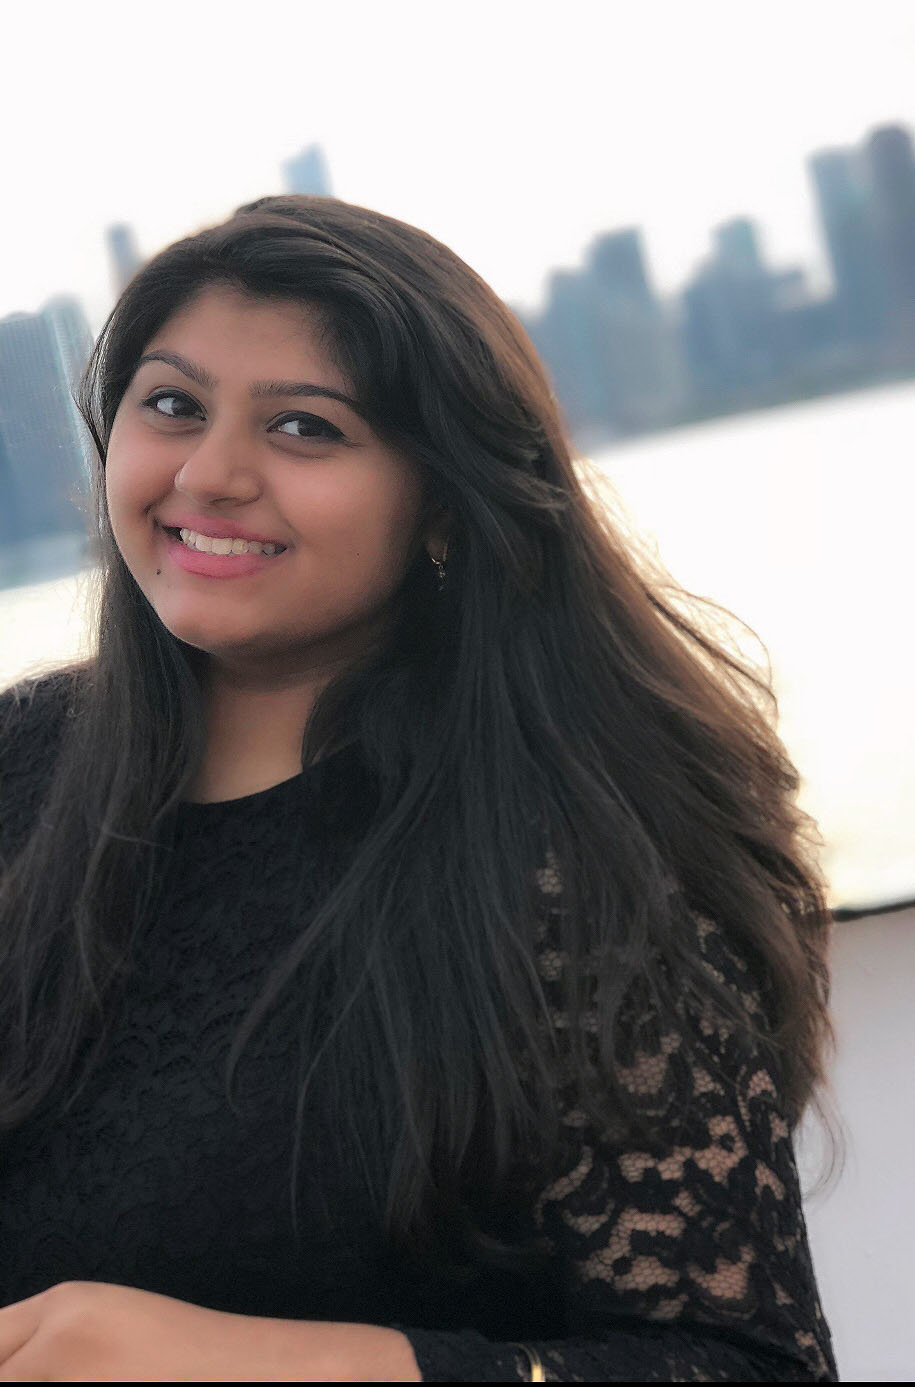 DePaul's Dilpreet Kaur is a junior majoring in political science with a minor in sociology and member of the university's inaugural Generation Success program cohort.